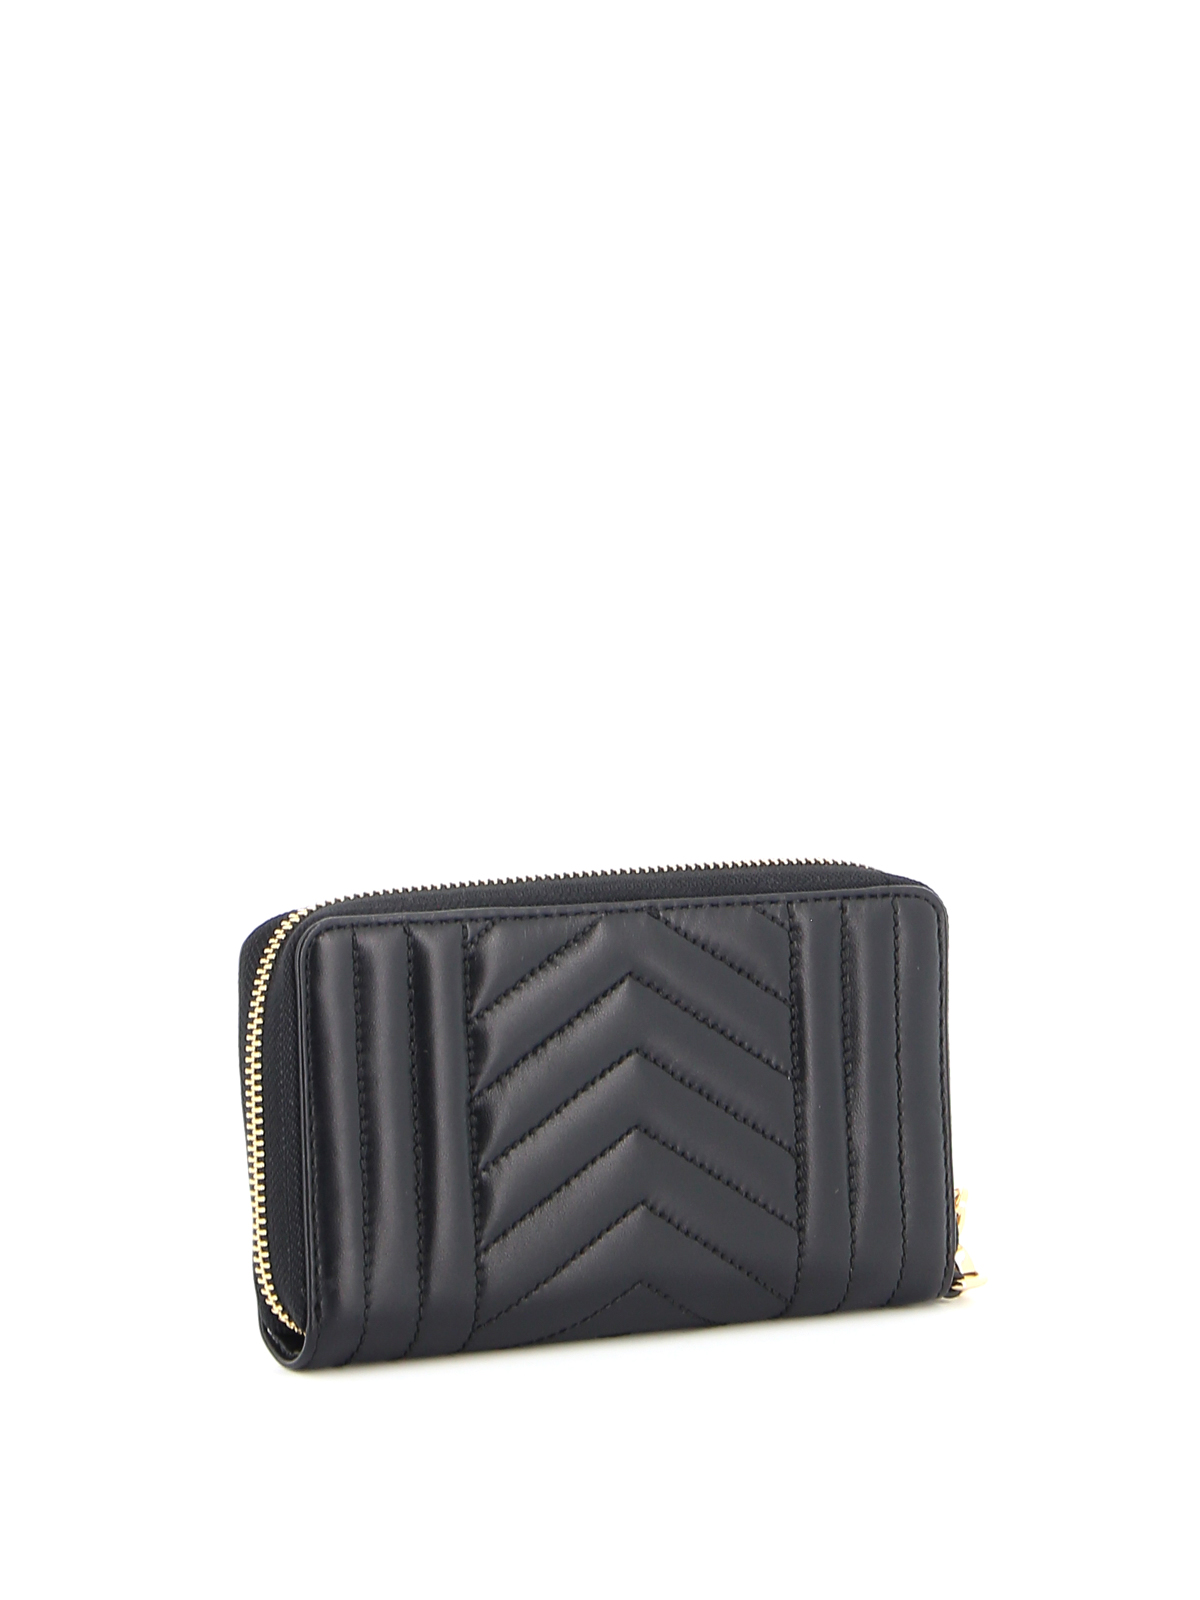 michael kors quilted wallet black